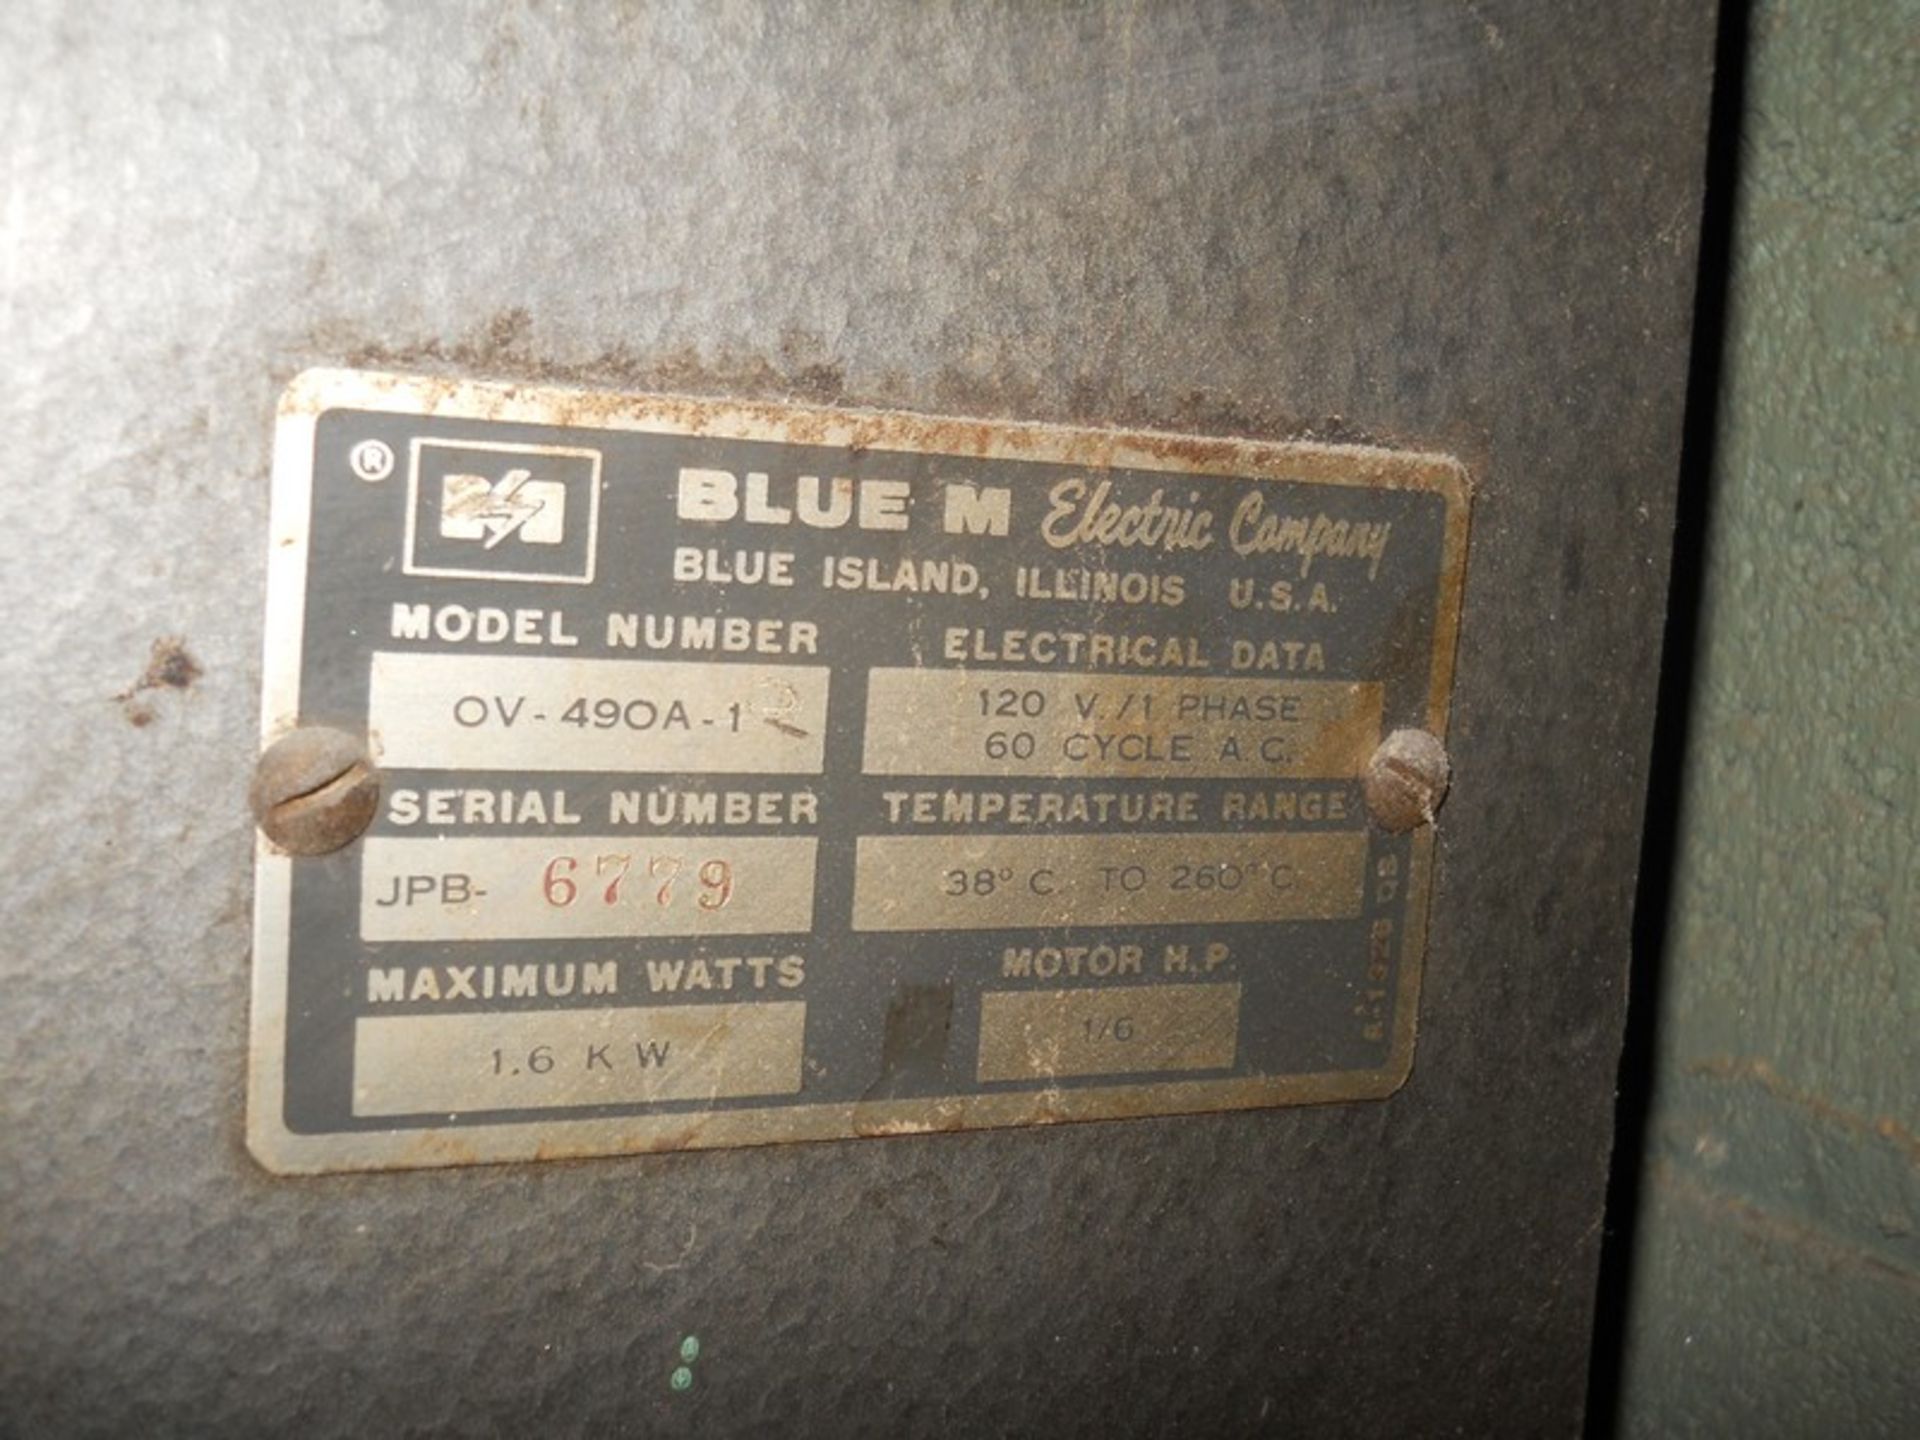 Blue-M Stabil-Therm OV-490A-1 Electric Constant Temperature Cabinet, S/N: 6779; with Power-O-Matic - Image 6 of 6